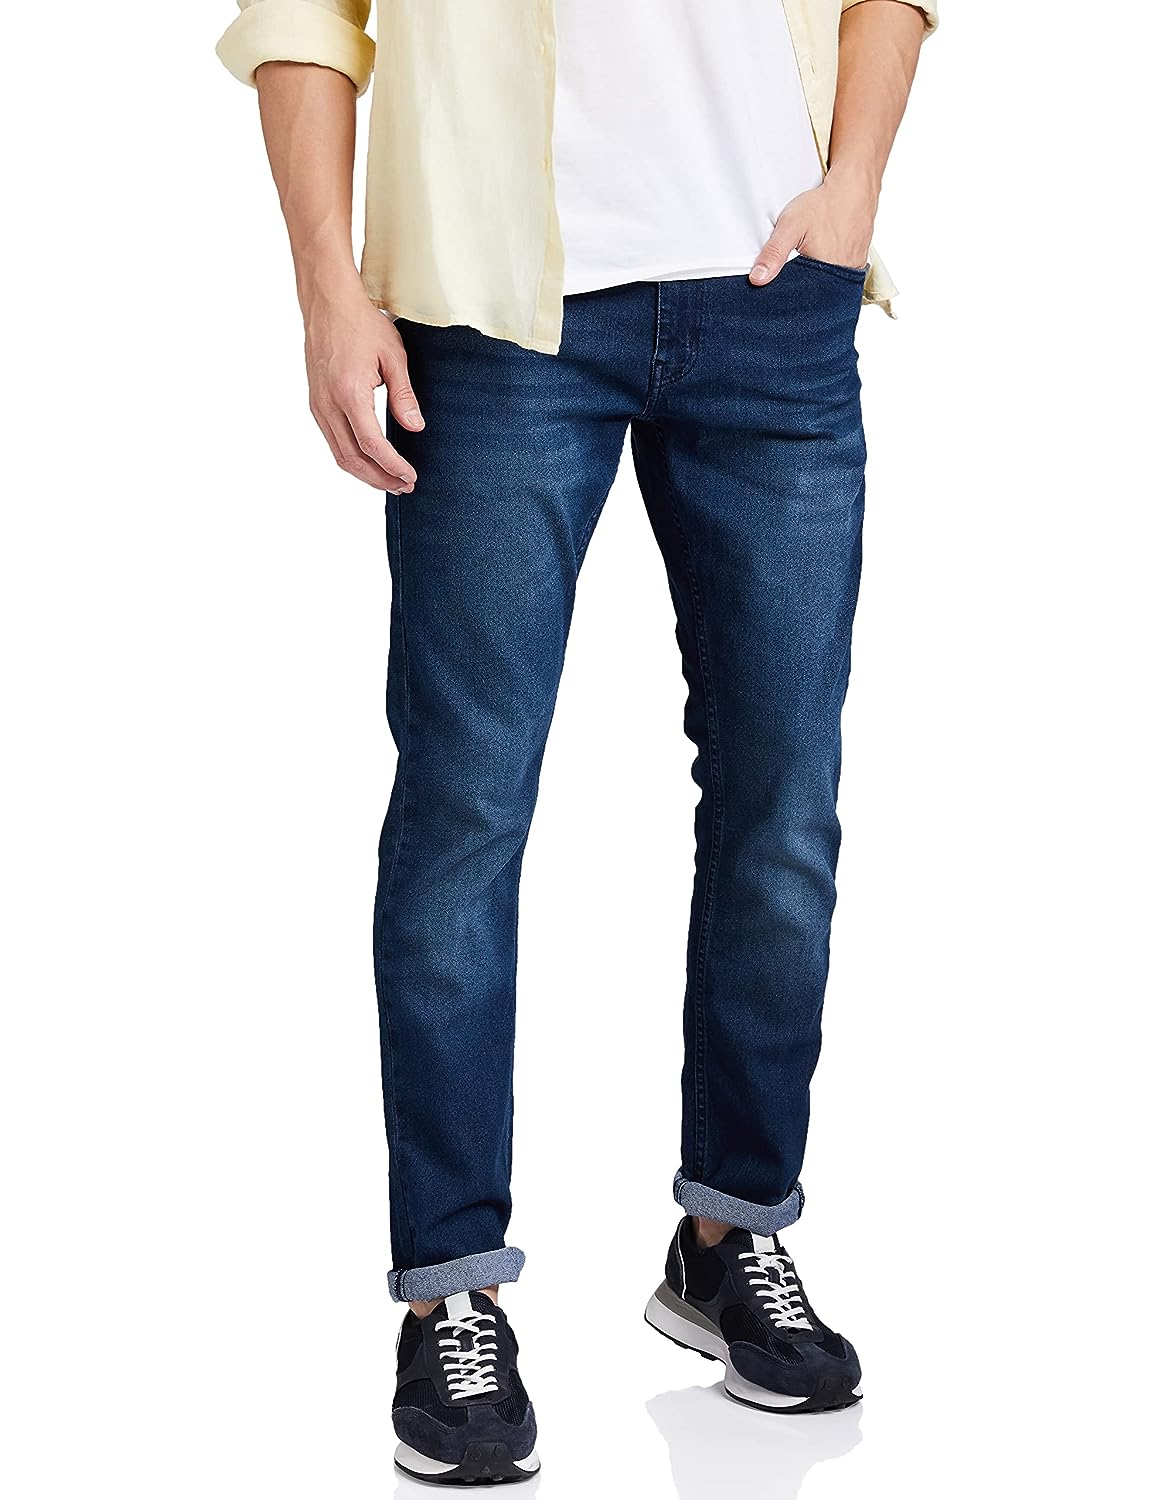 WHAT IS THE HIGH-QUALITY MEN JEANS WHOLESALER IN INDIA by Whiteapple1 -  Issuu